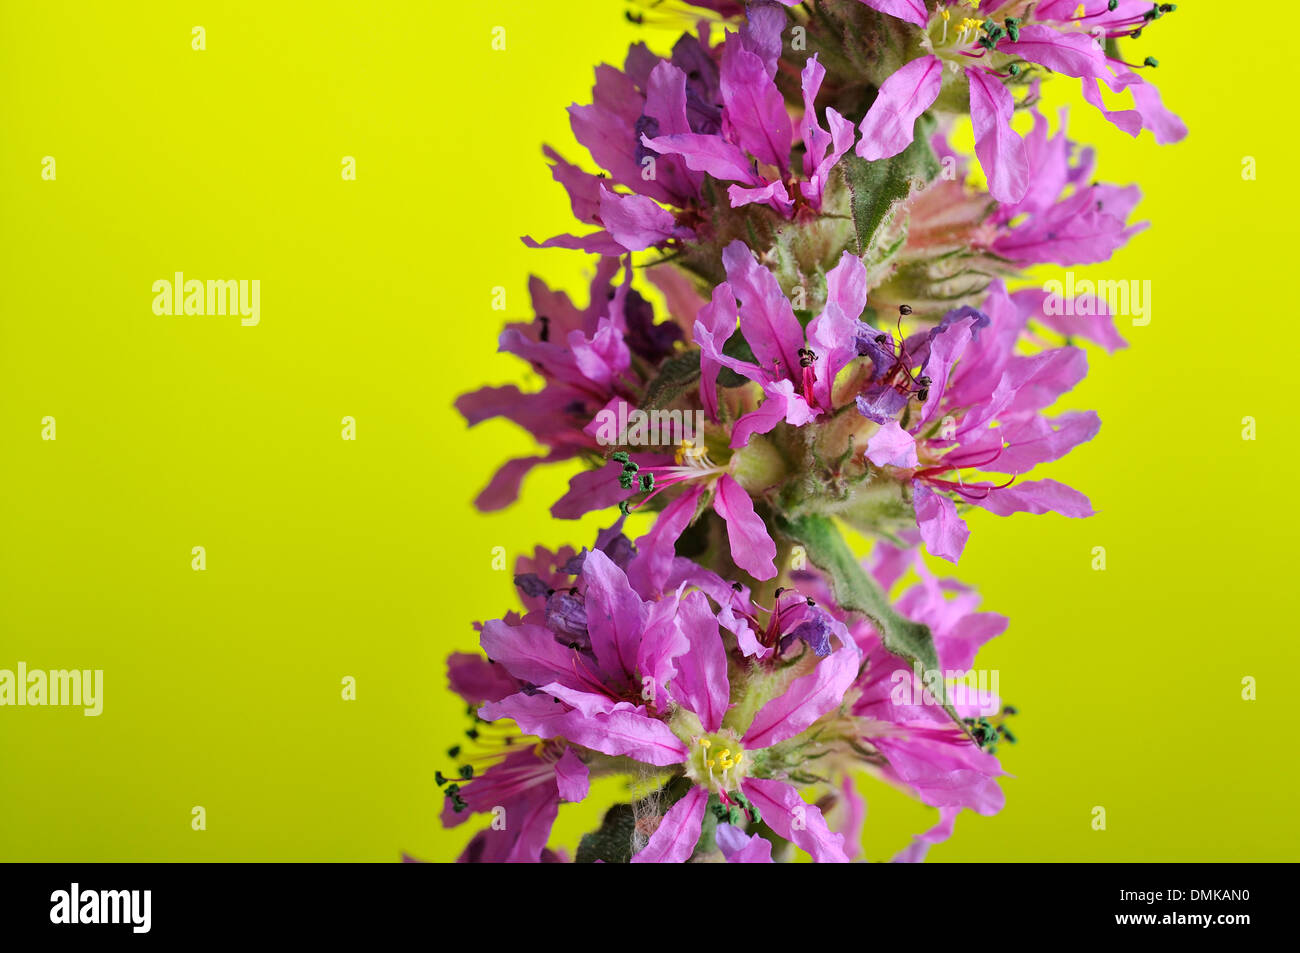 Purple loosestrife, Lythrum salicaria (Lythraceae), horizontal portrait of violet flowers with nice out of focus background. Stock Photo